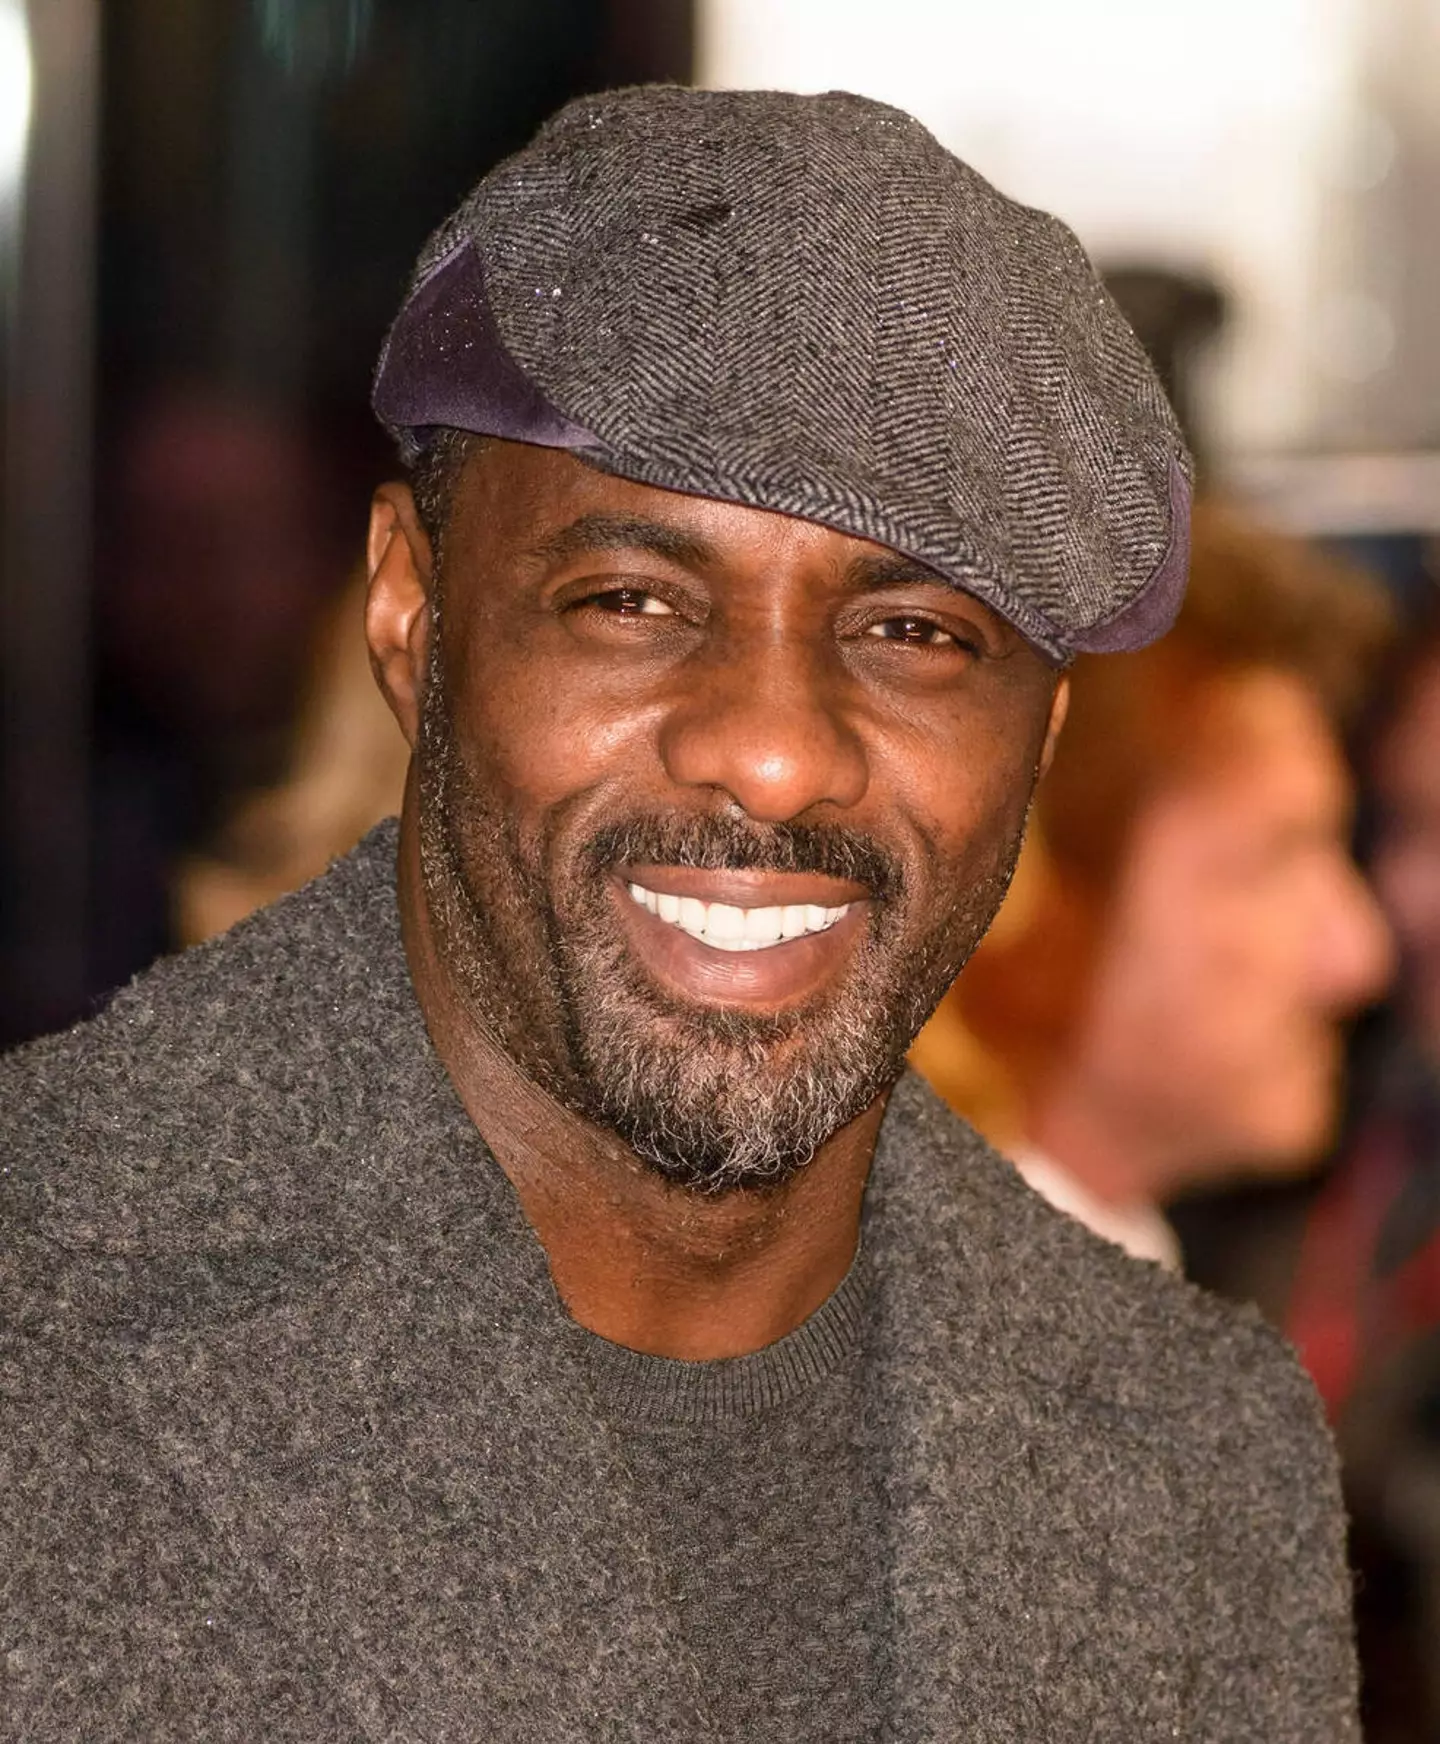 It turns out that Idris Elba had some surprising side hustles when trying to make it in Hollywood.